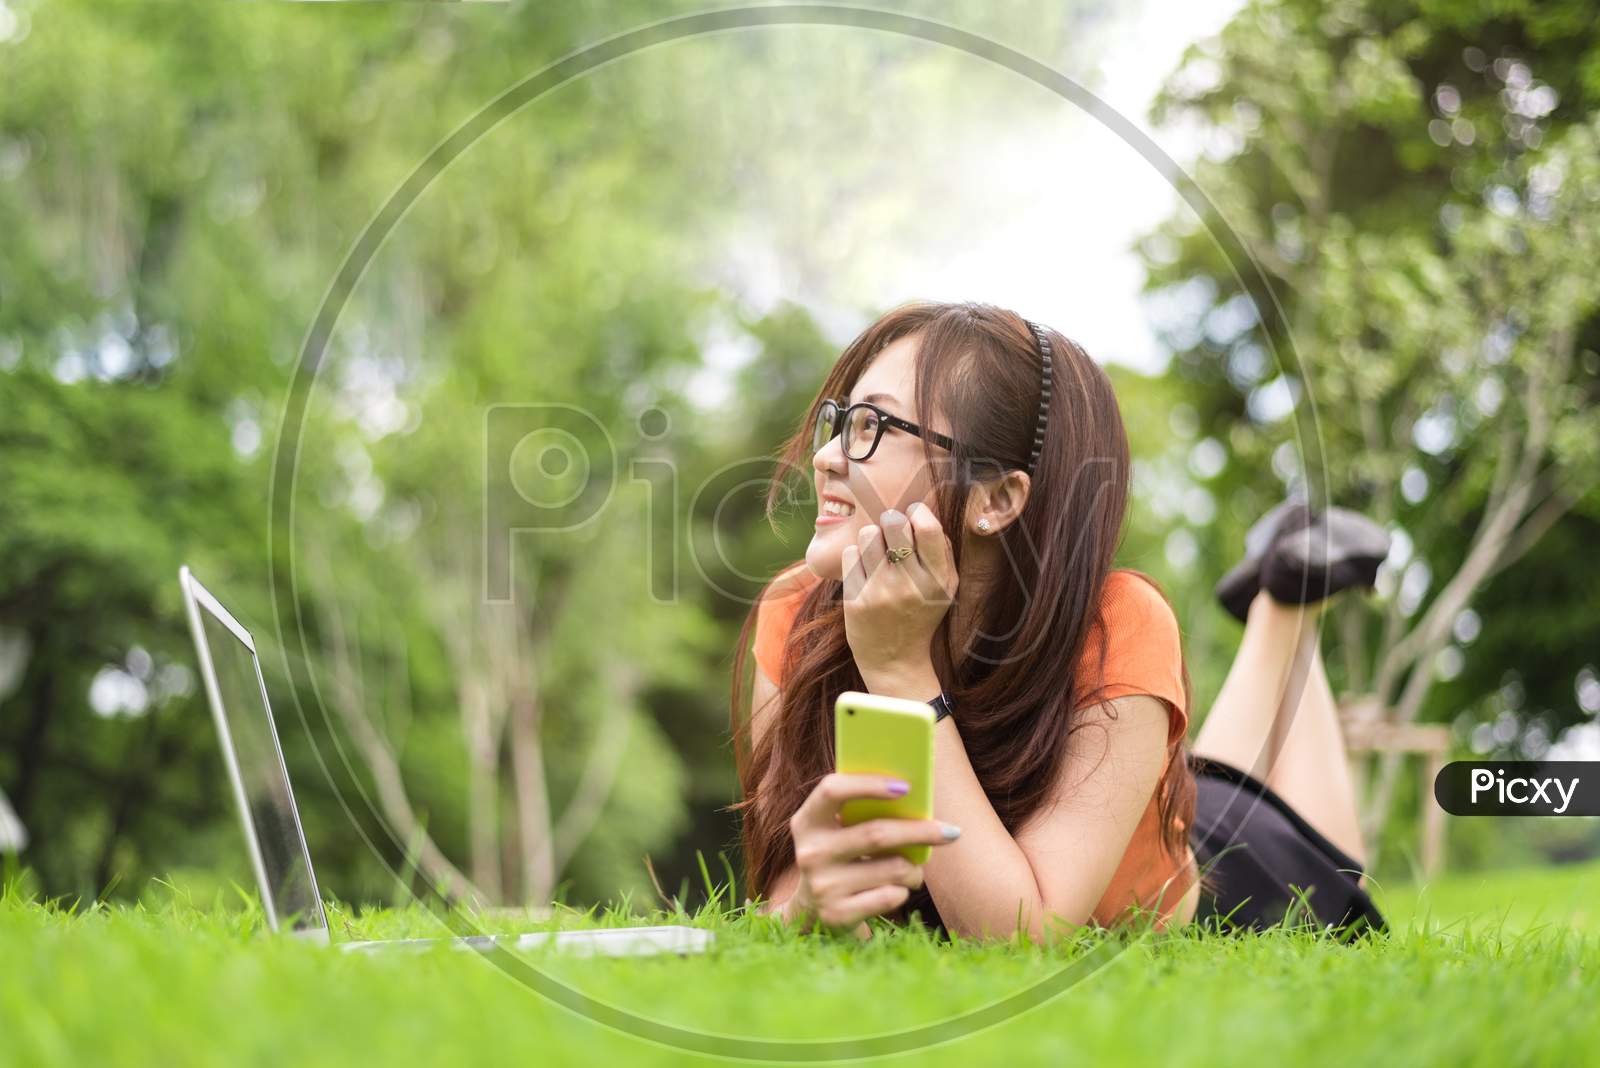 Happy Asian Woman Resting And Looking Beside In Park With Smartphone. People And Lifestyles Concept. Technology And Beauty Theme.